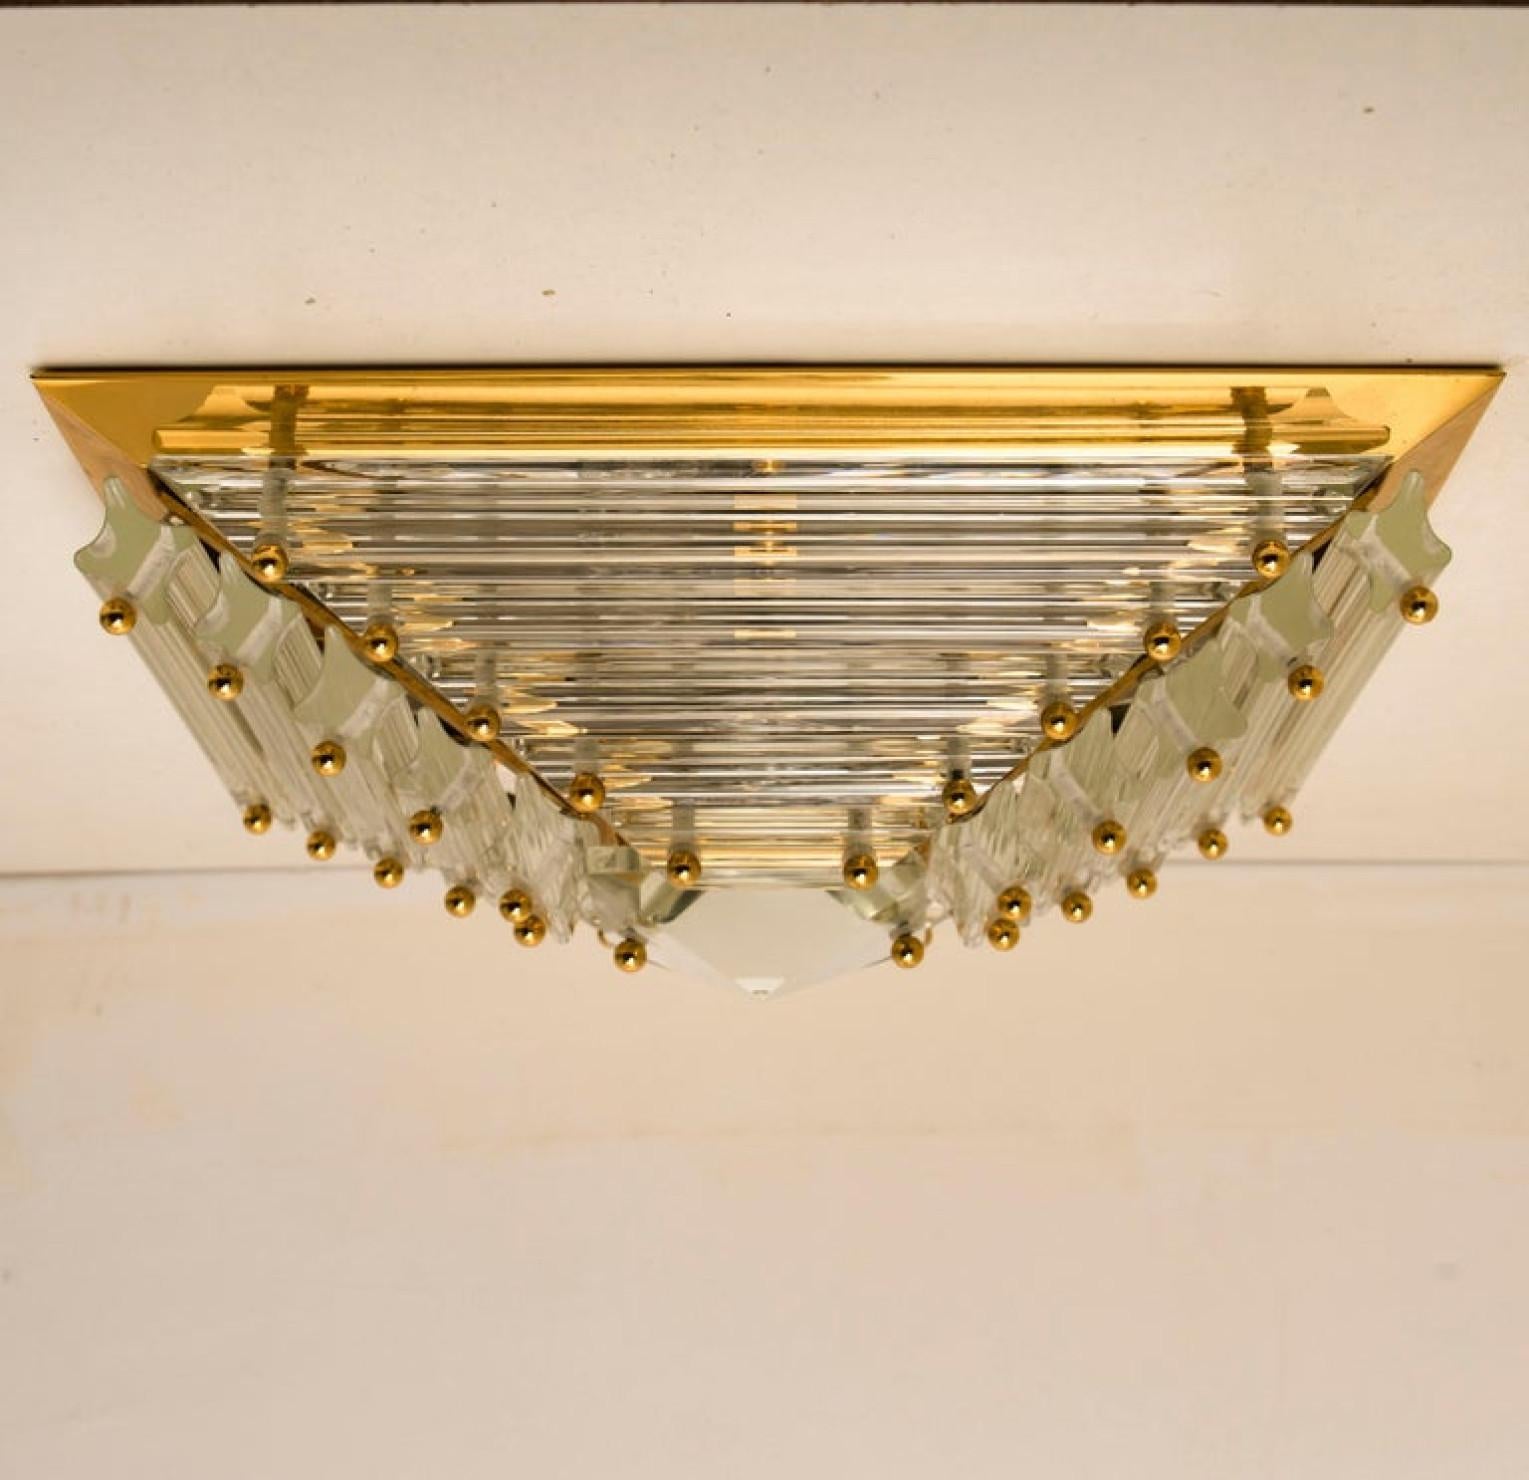 1 of the 2 Gold-Plated Piramide Venini Flush Mounts, 1970s, Italy For Sale 4